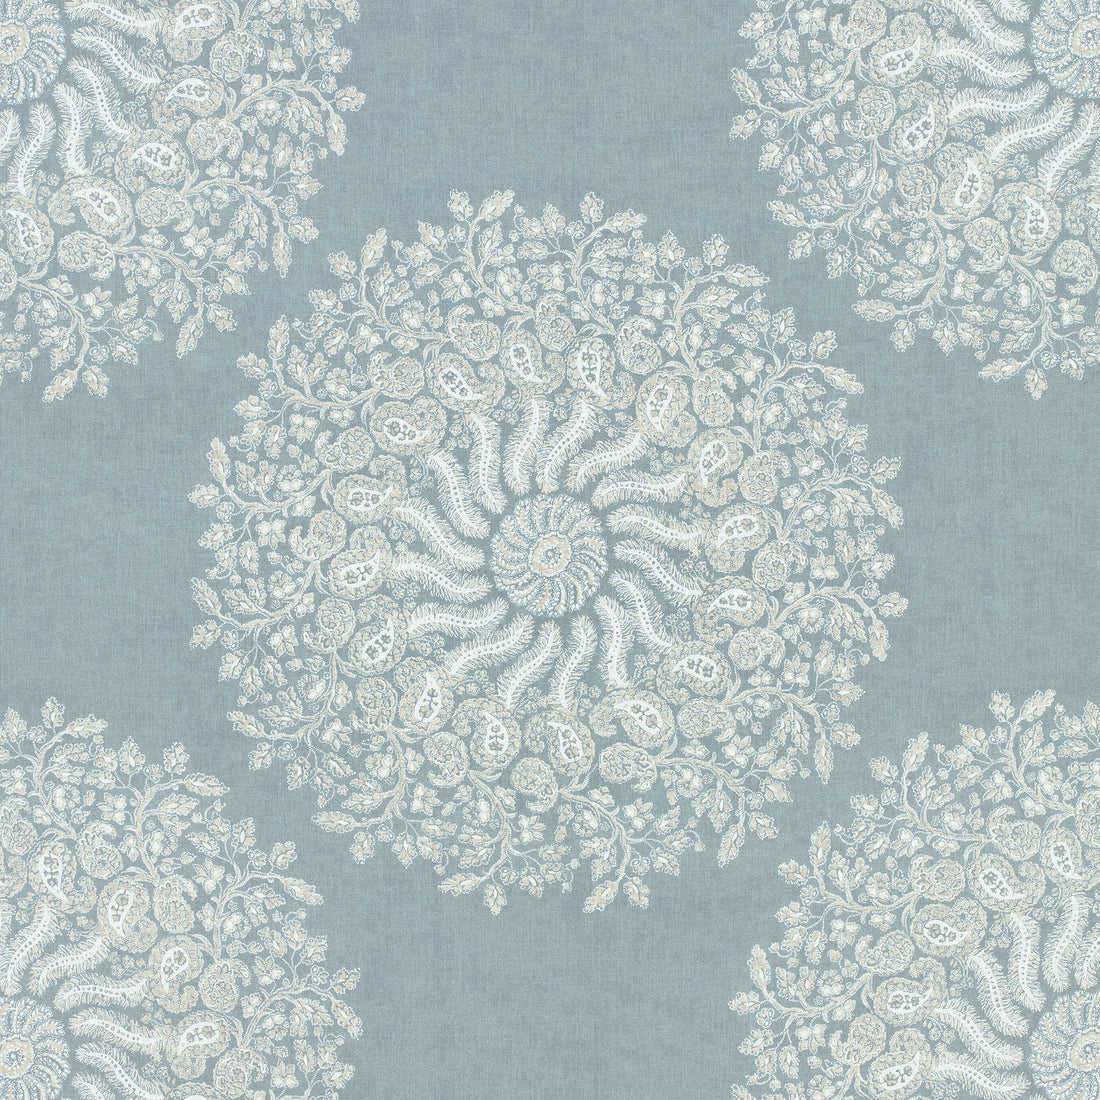 La Provence fabric in robins egg color - pattern number AF78729 - by Anna French in the Palampore collection